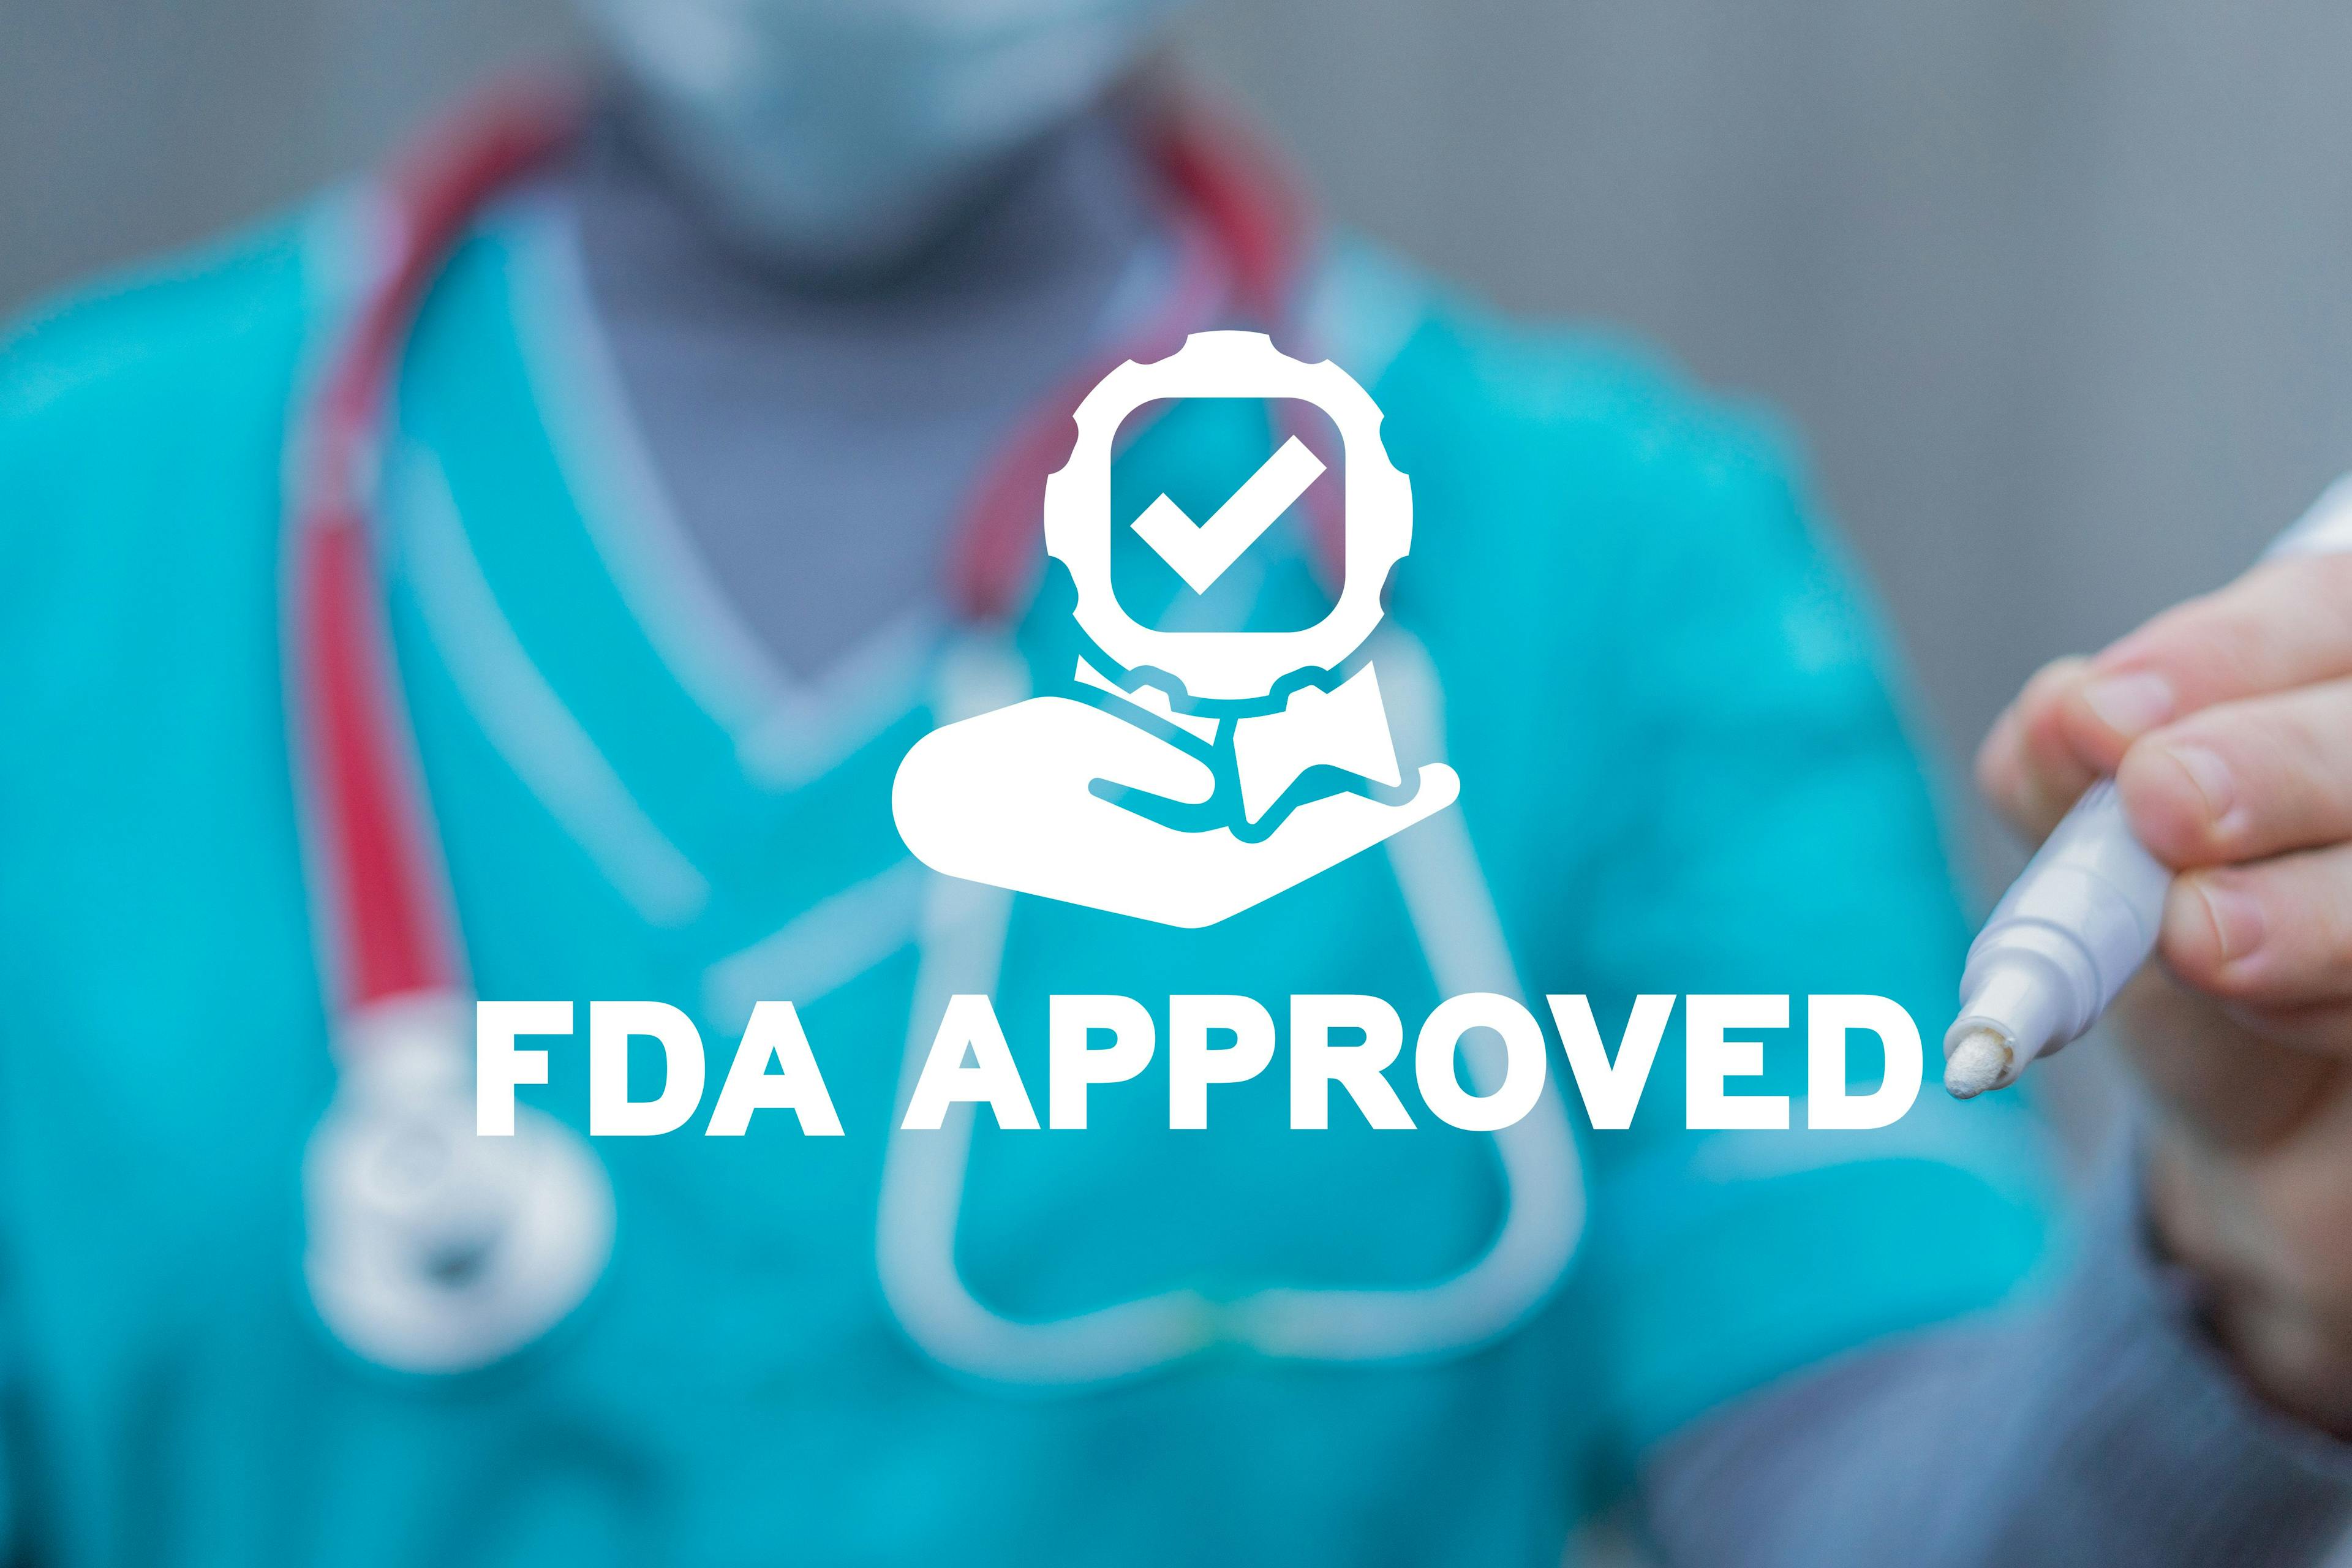 Concept of FDA approved. Food and drugs administration. Quality medcine, assurance, organization.